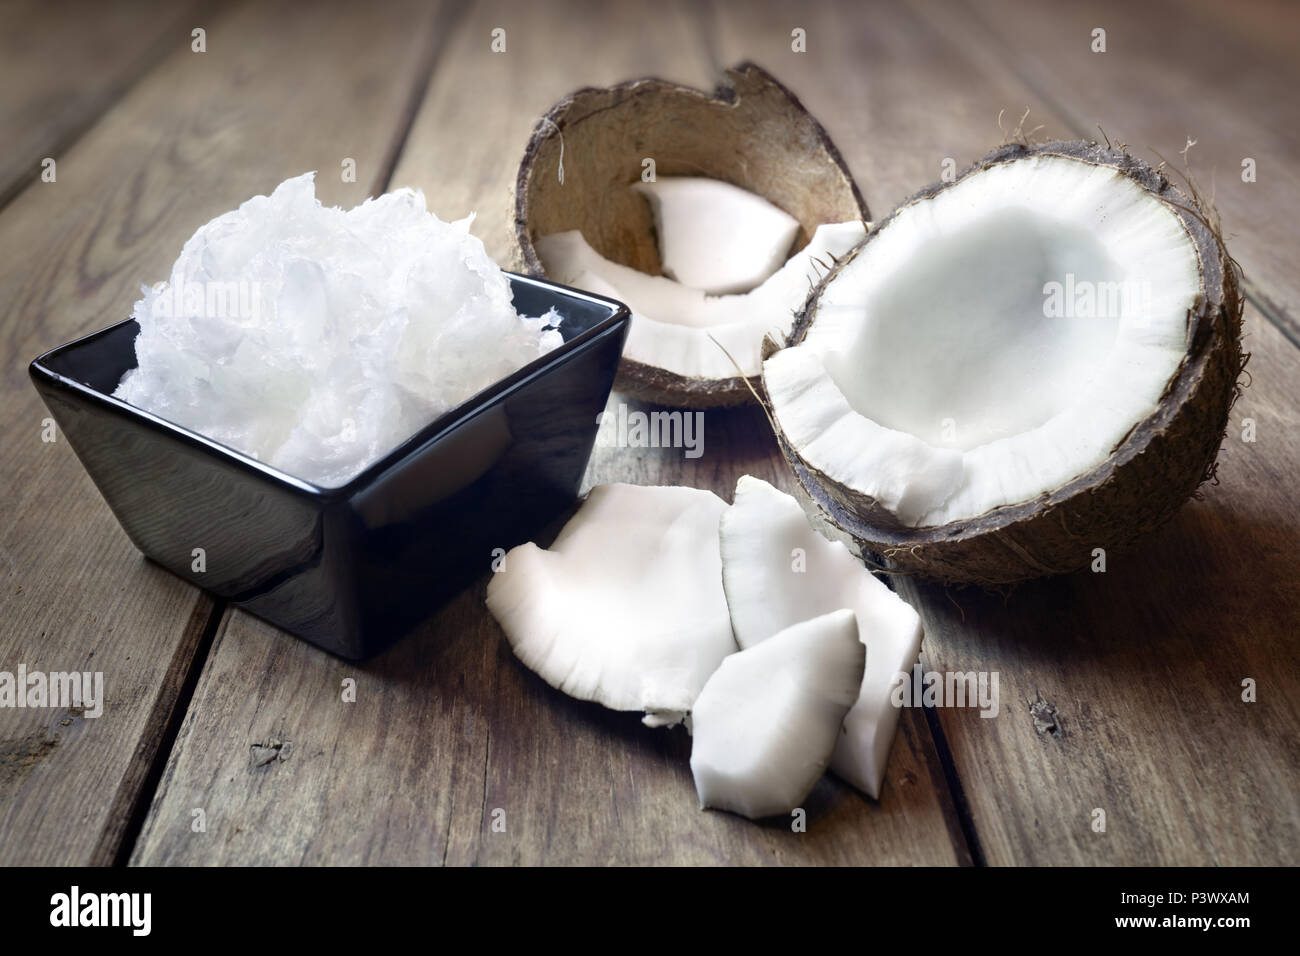 Fresh coconuts and coconut oil cooking ingredient or spa treatment Stock Photo